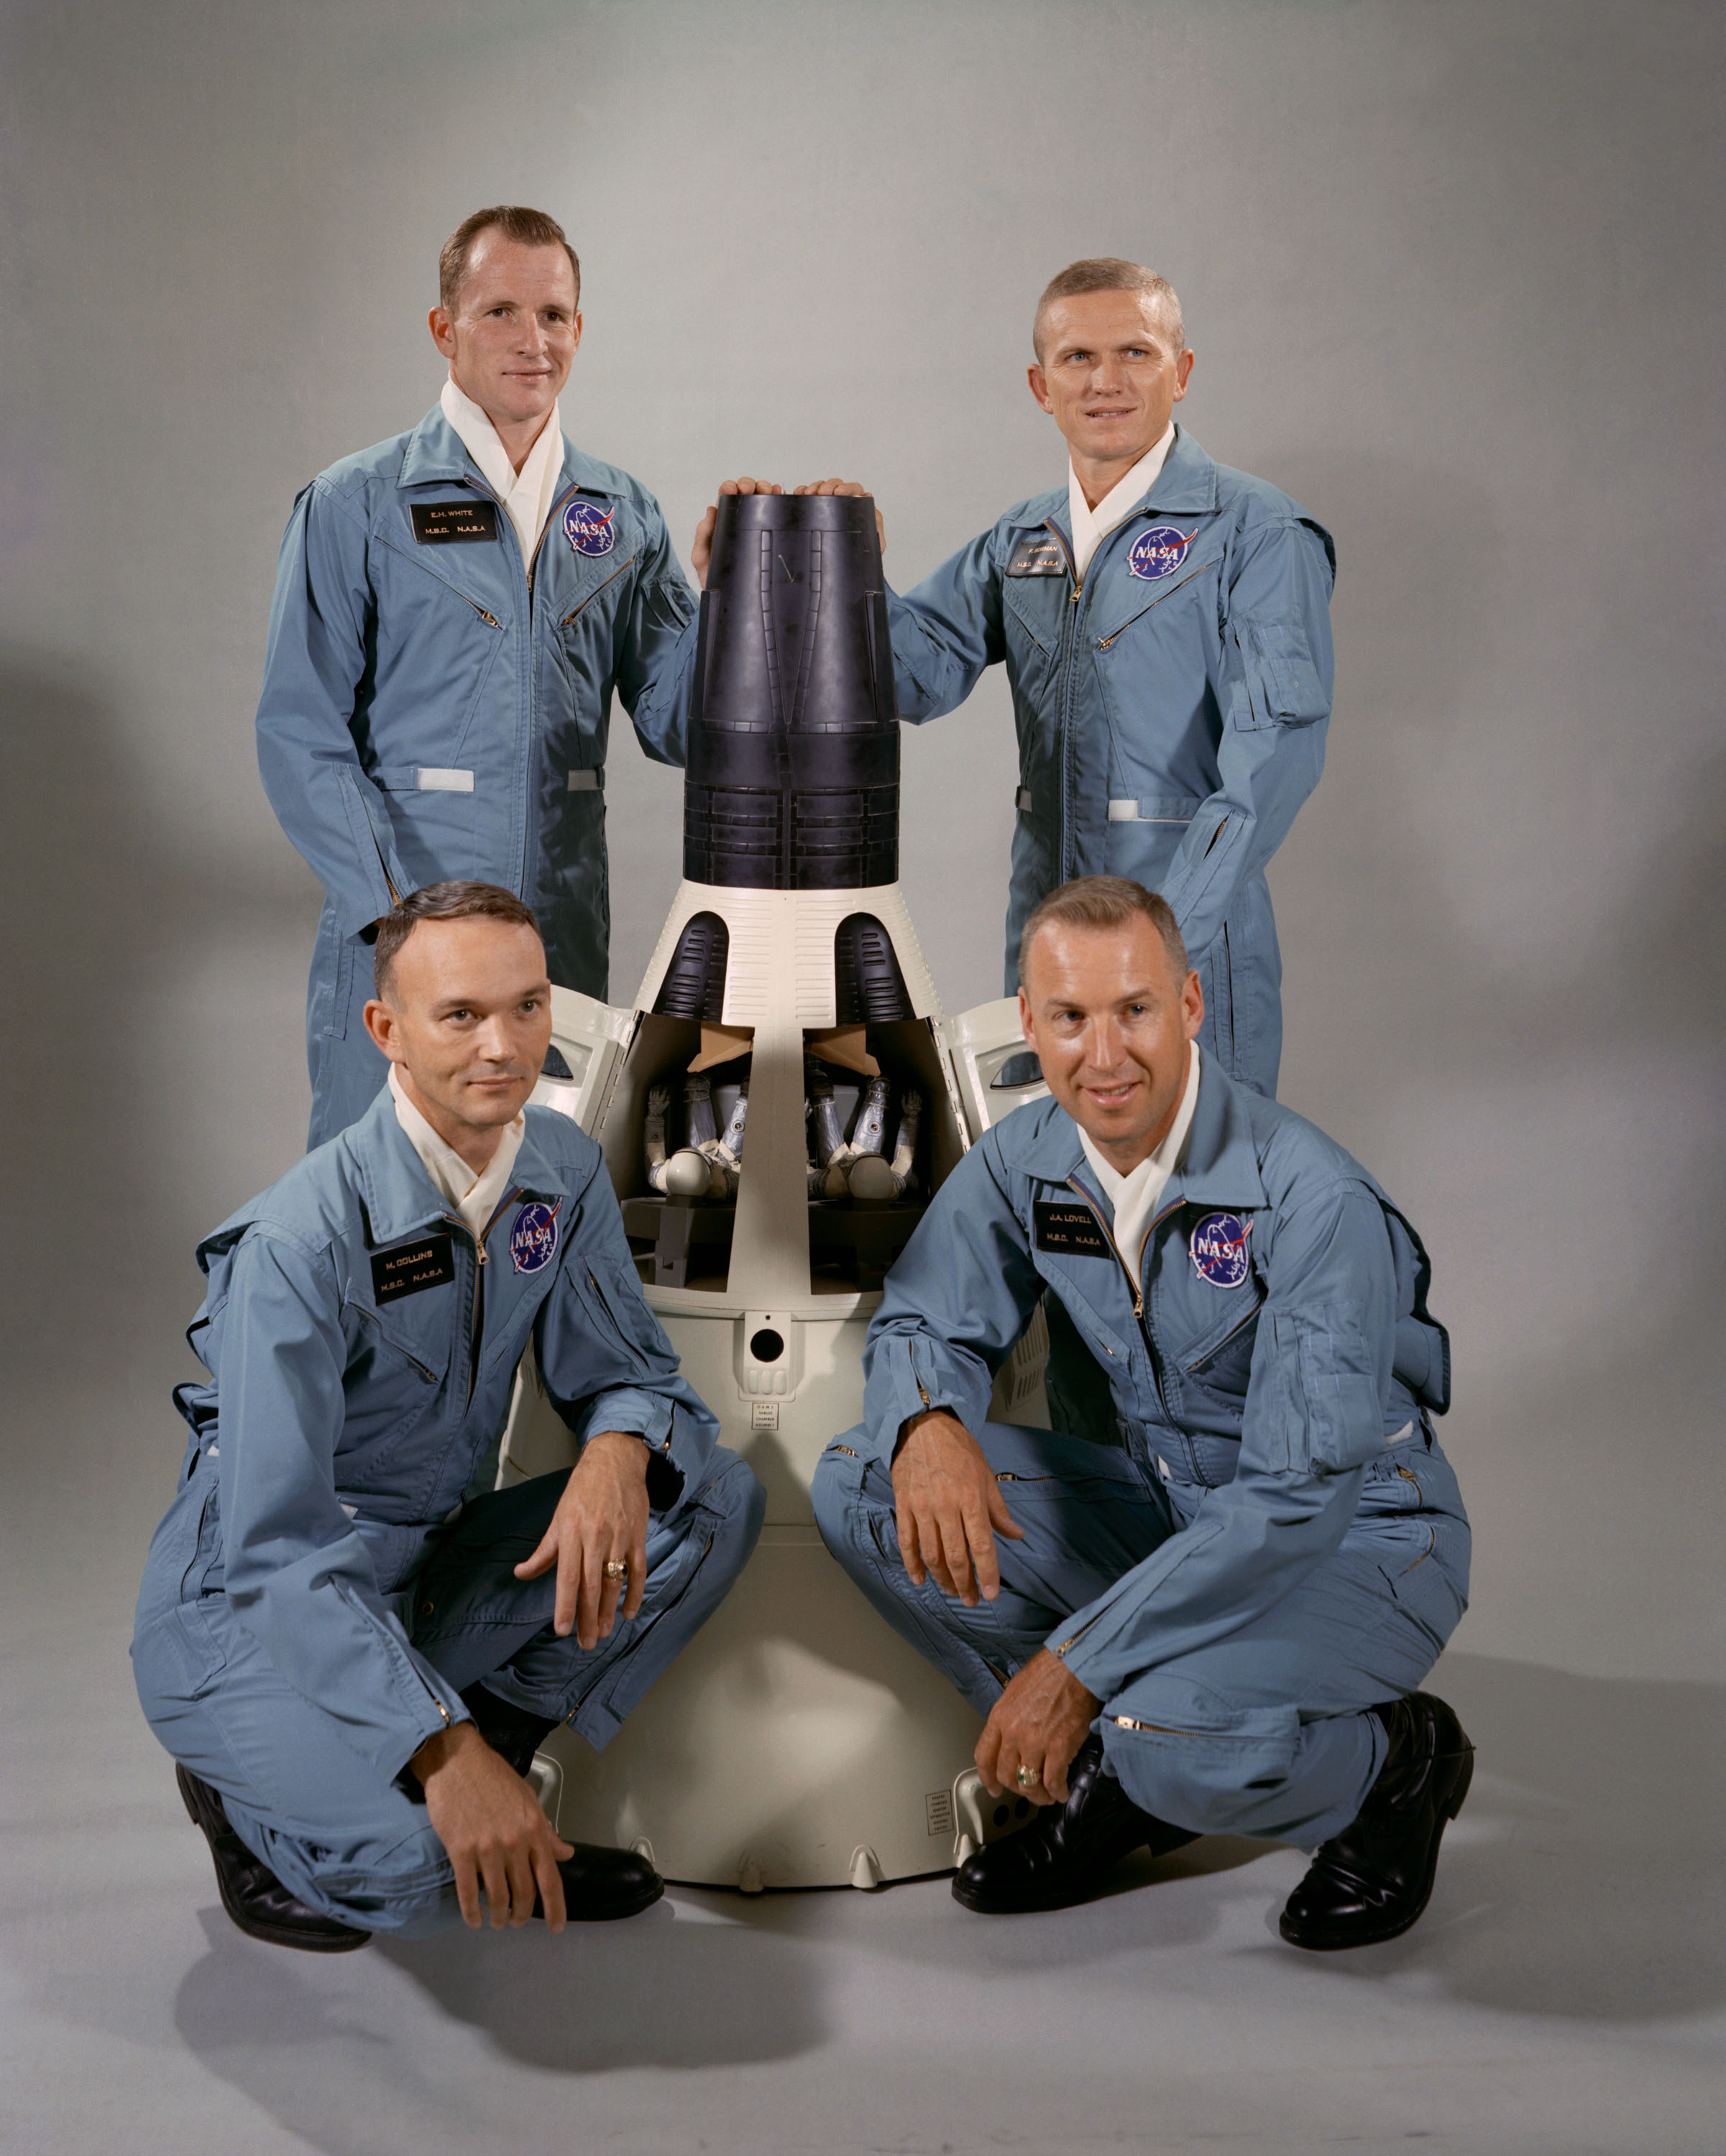 Michael Collins, lower left, the first of The Fourteen to receive a crew assignment as backup pilot on Gemini VII